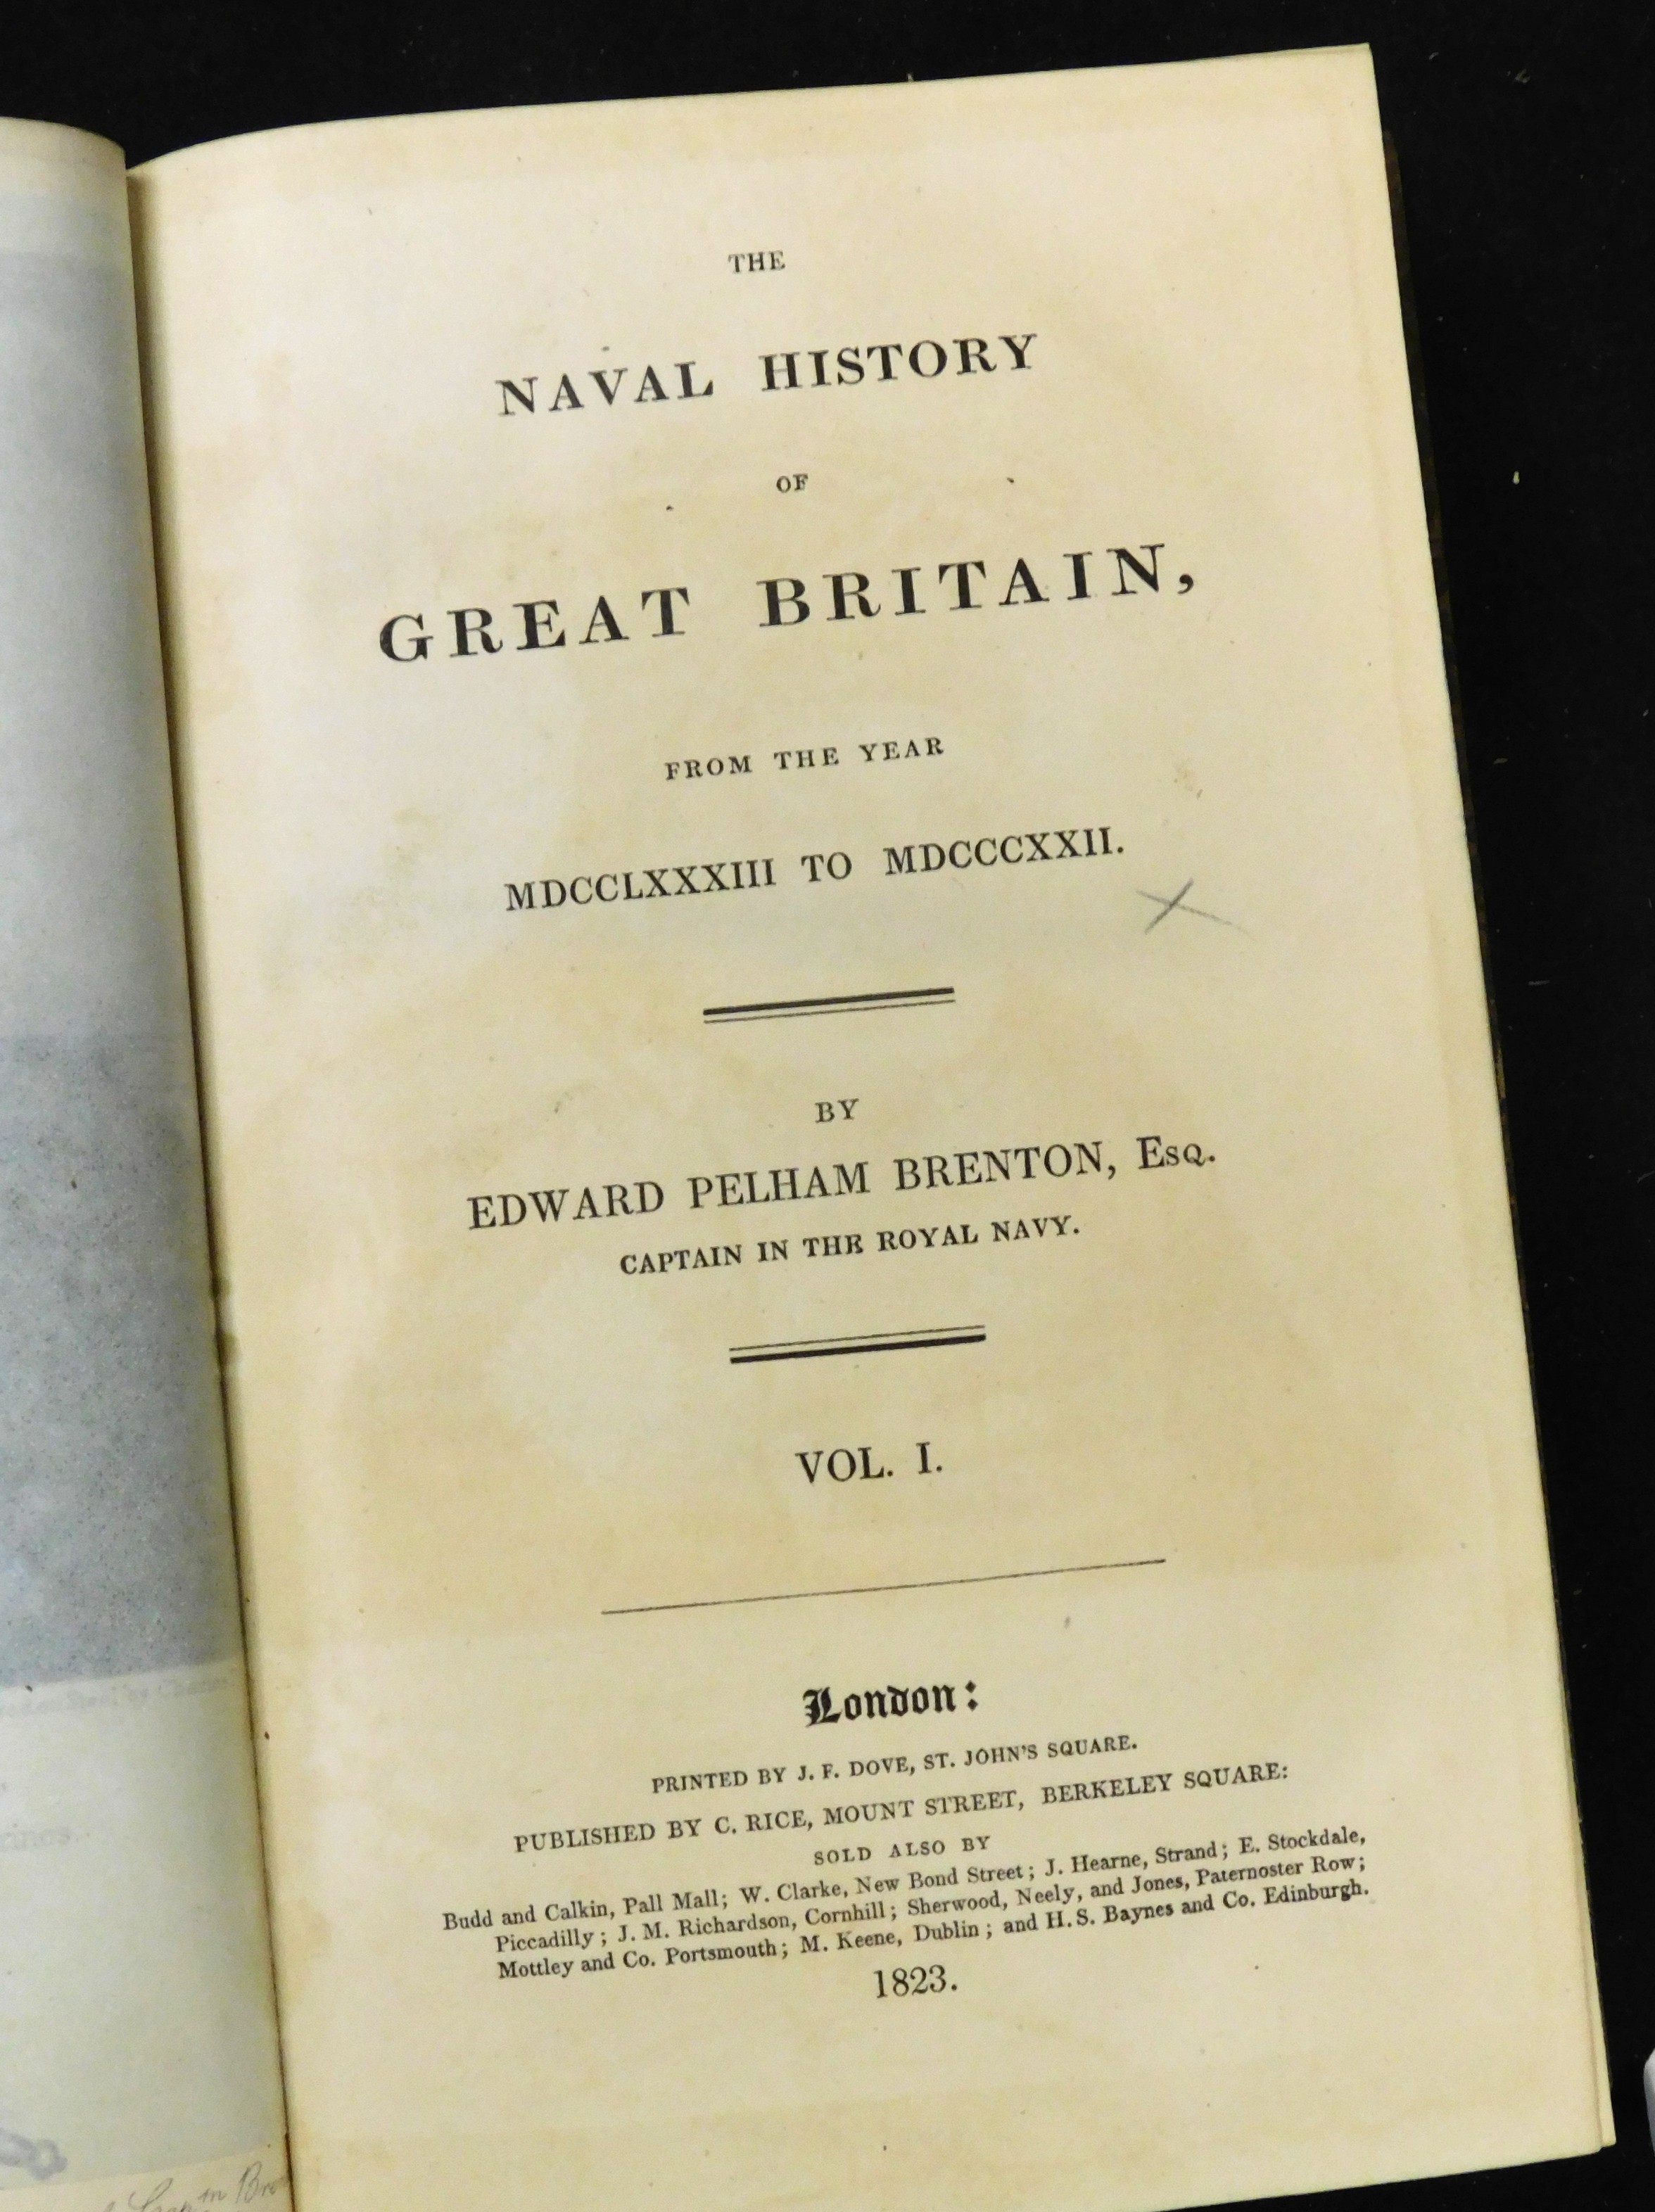 EDWARD PELHAM BRENTON: A NAVAL HISTORY OF GREAT BRITAIN FROM THE YEAR MDCCLXXXIII TO MDCCCXXII, - Image 3 of 5